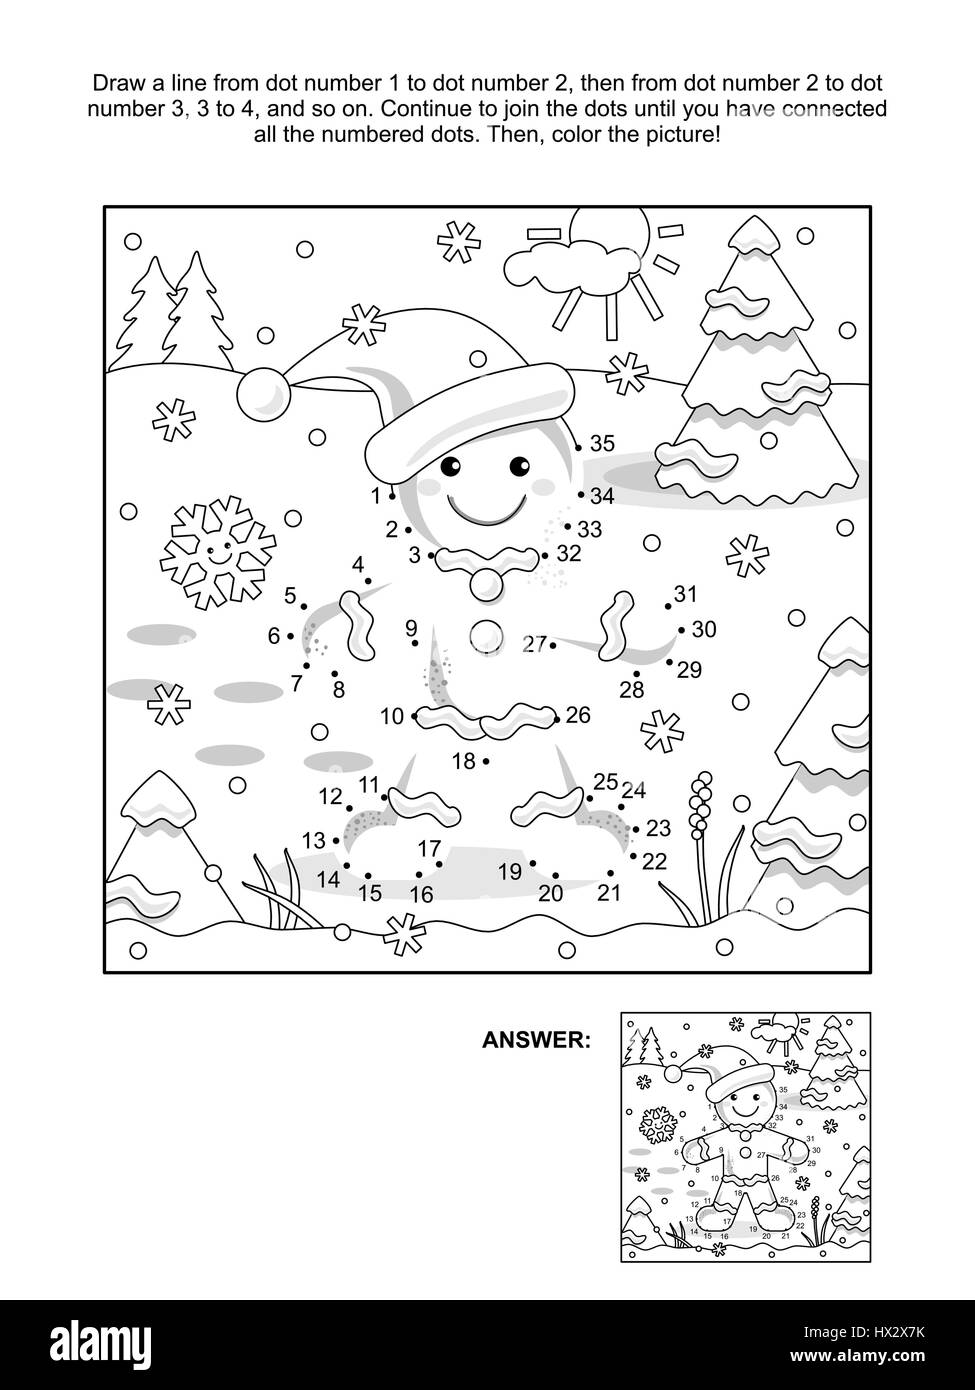 New Year or Christmas themed connect the dots picture puzzle and coloring page with ginger man. Answer included. Stock Vector